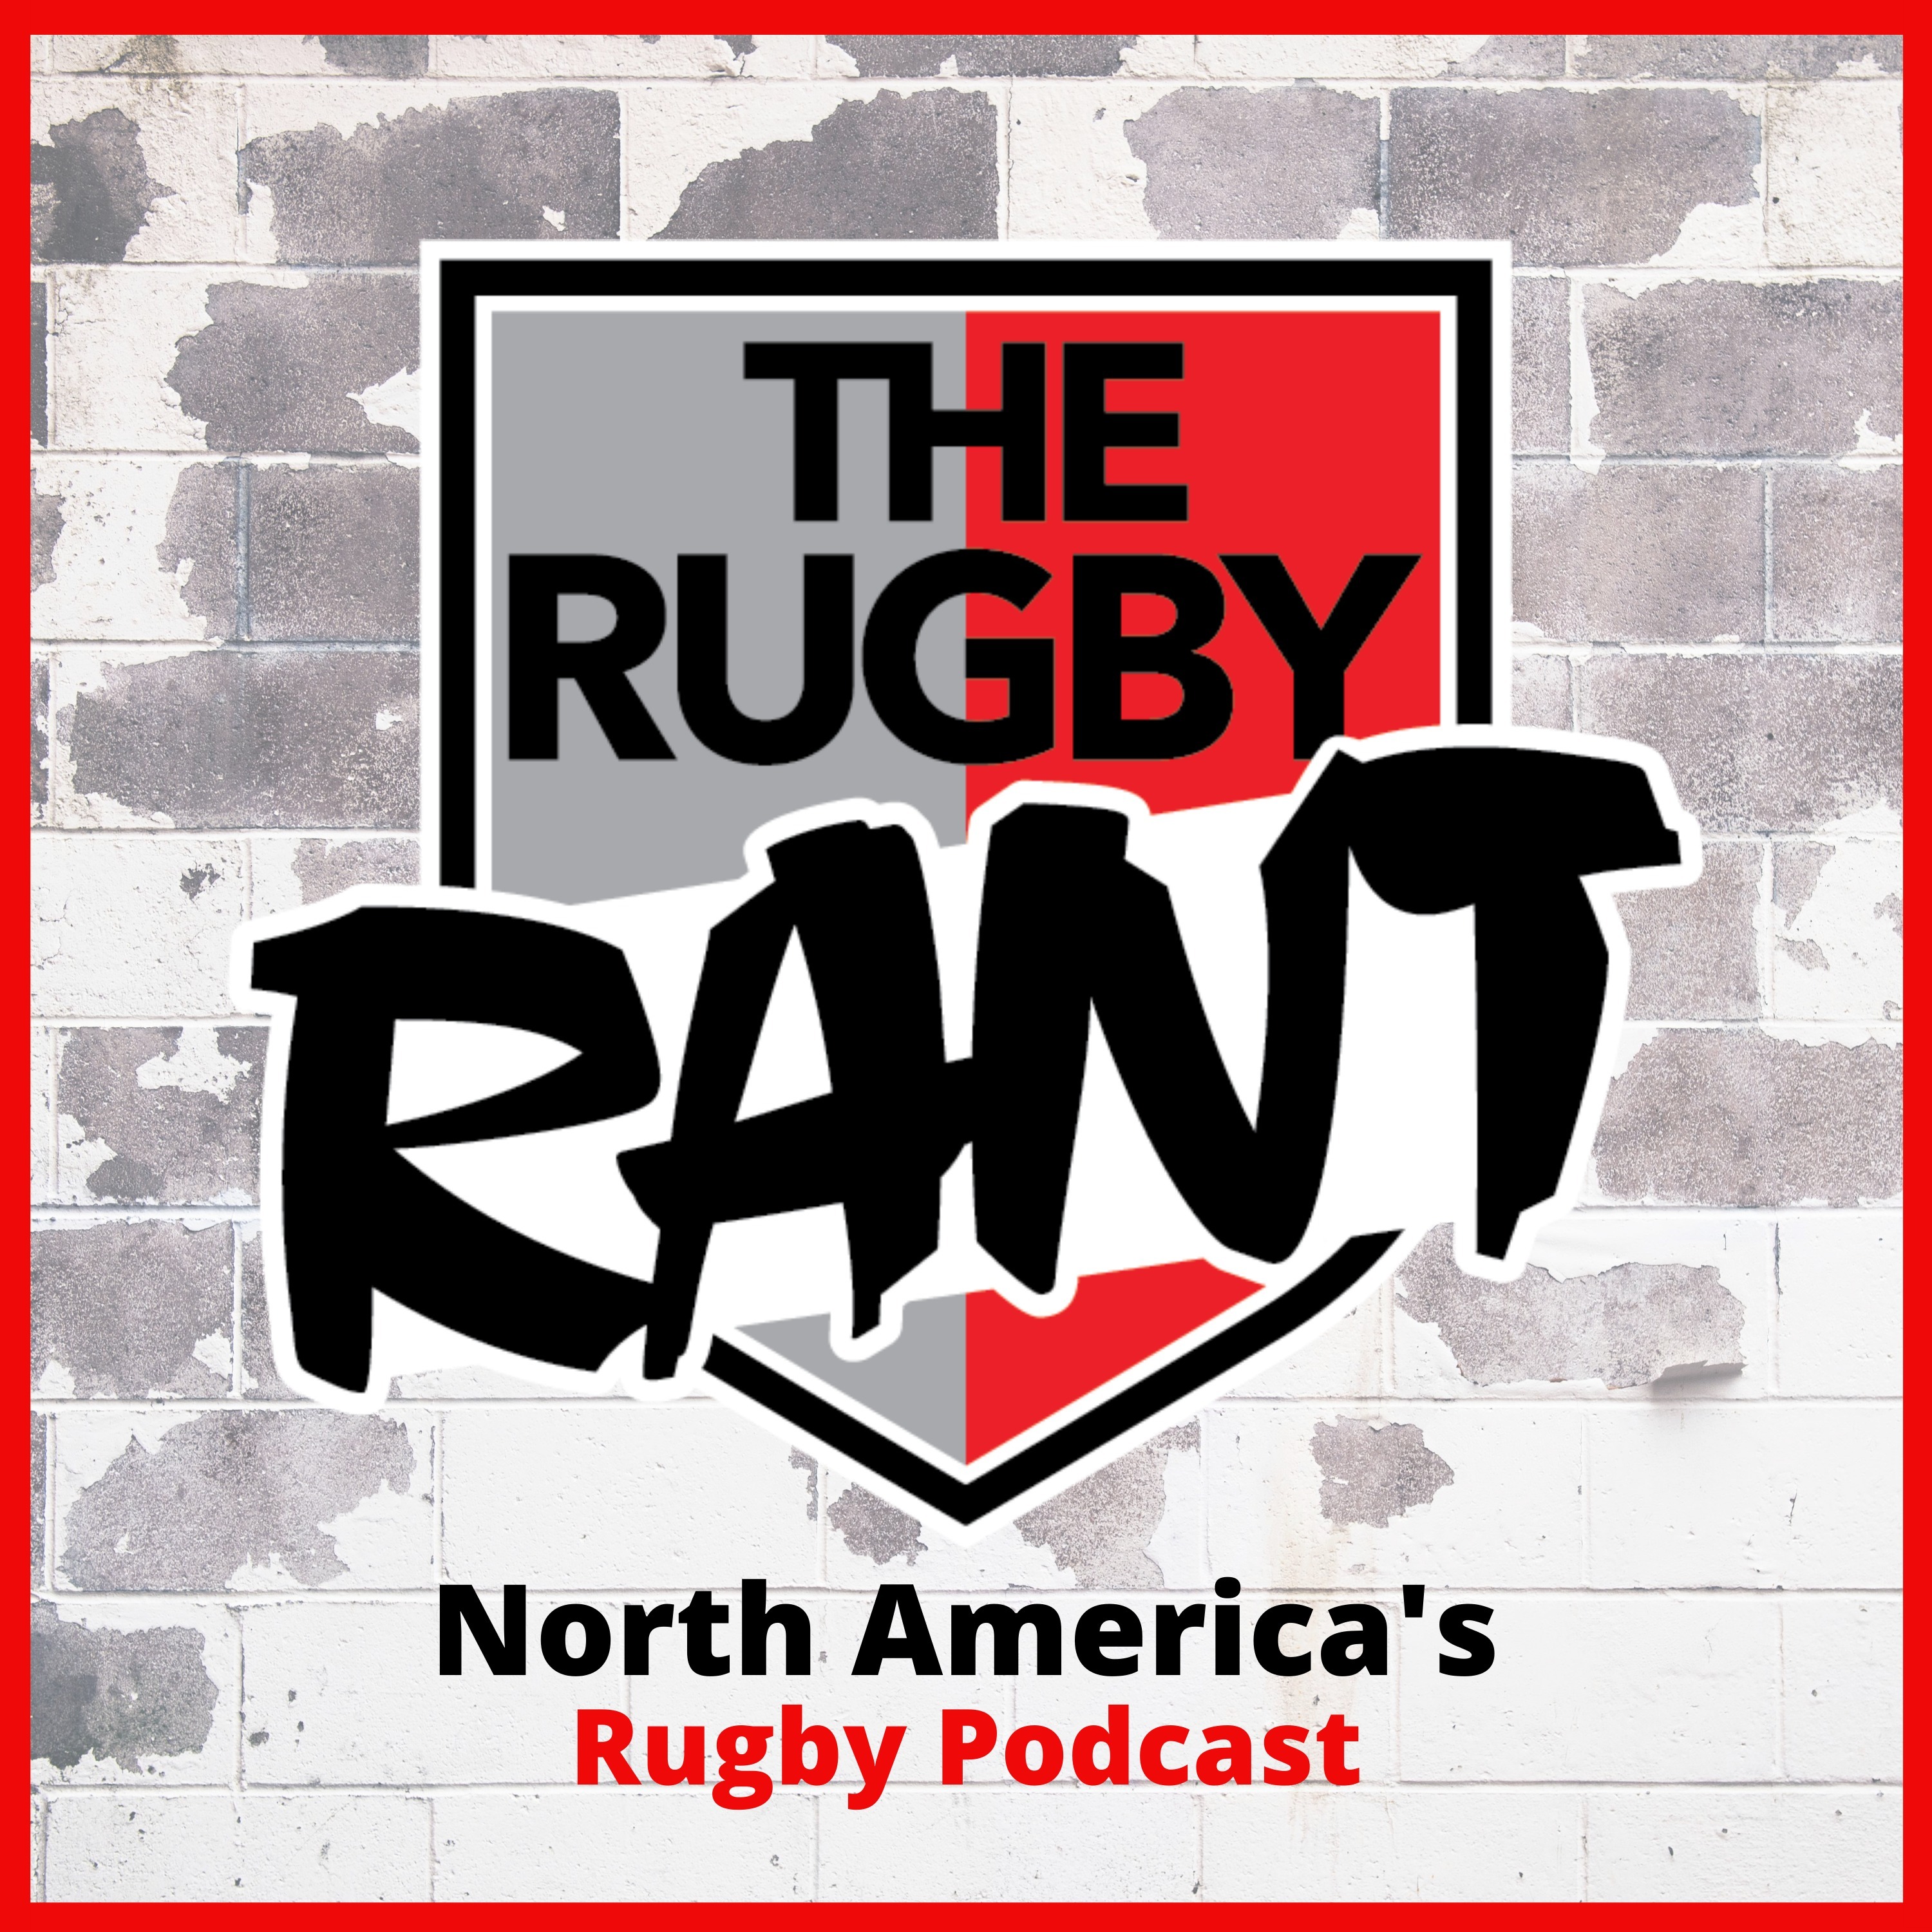 The Rugby Rant - Run, Pass or Kick with Jonas Petrakopoulos